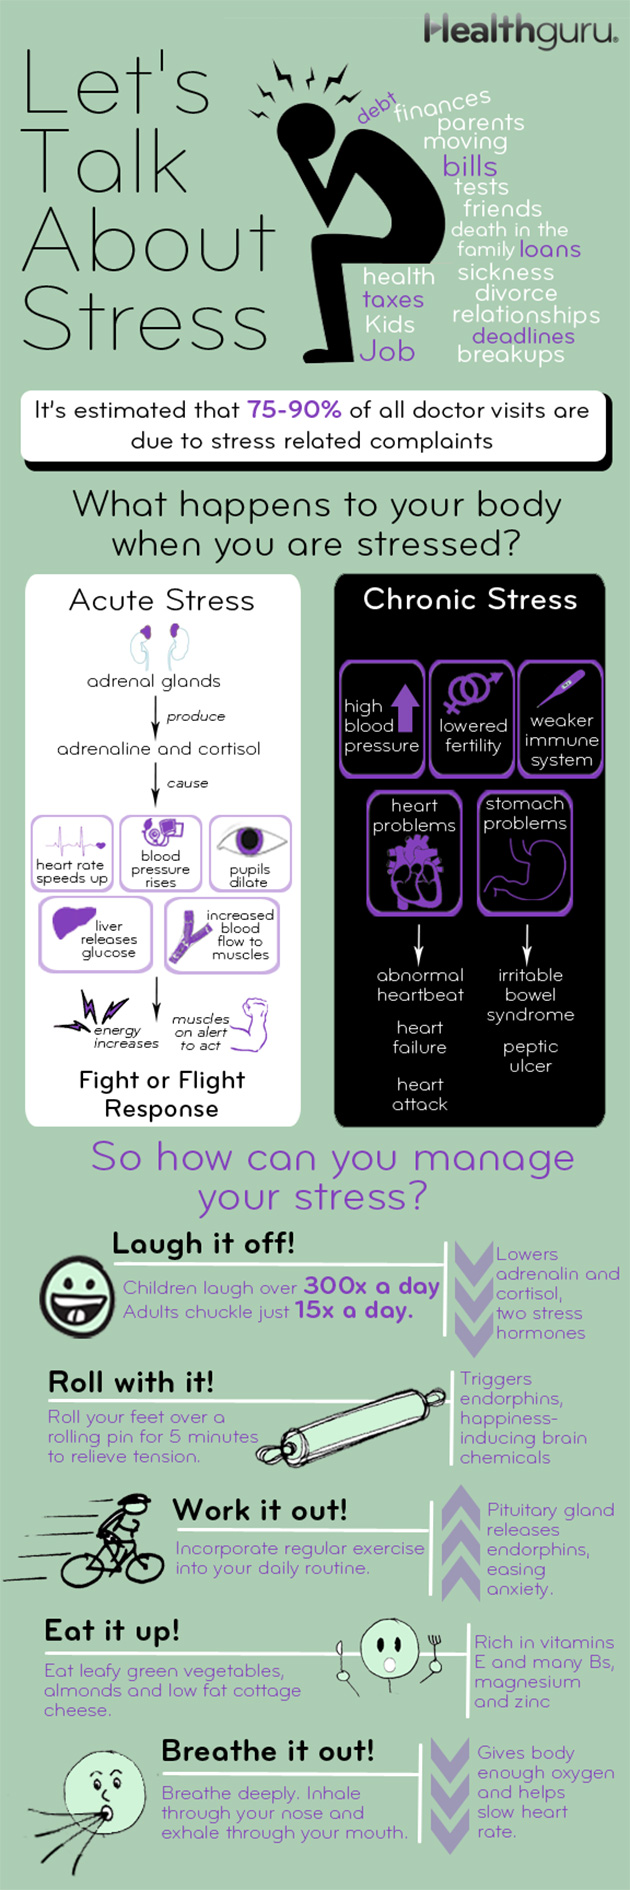 How To Fight With Stress Infographic